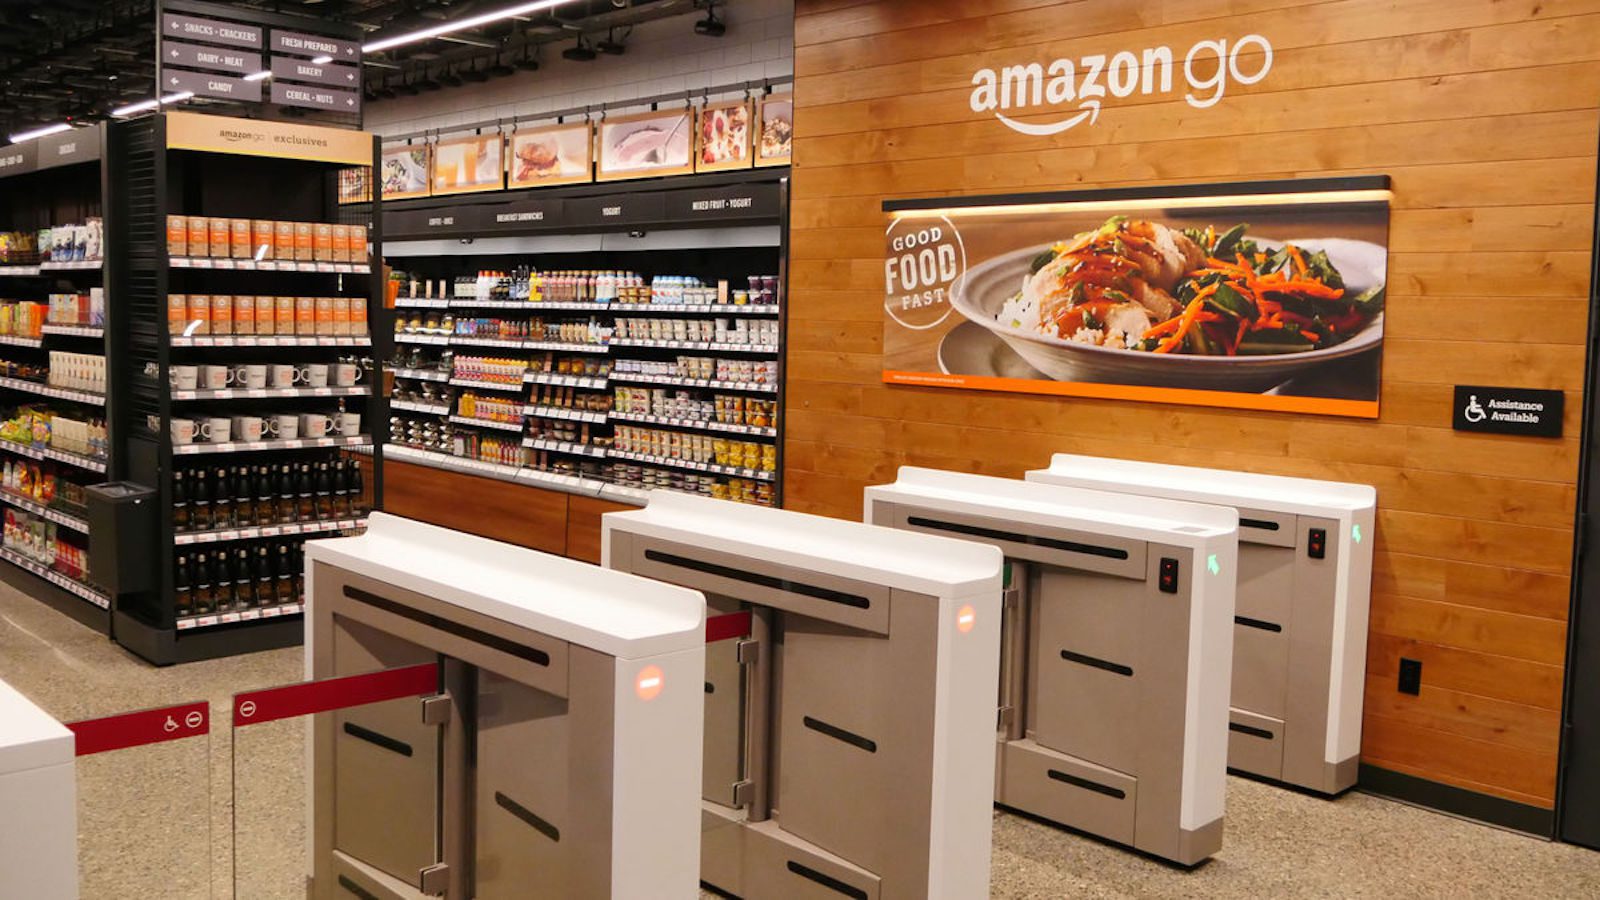 Retail Evolves with AI-Equipped Cashierless Checkouts